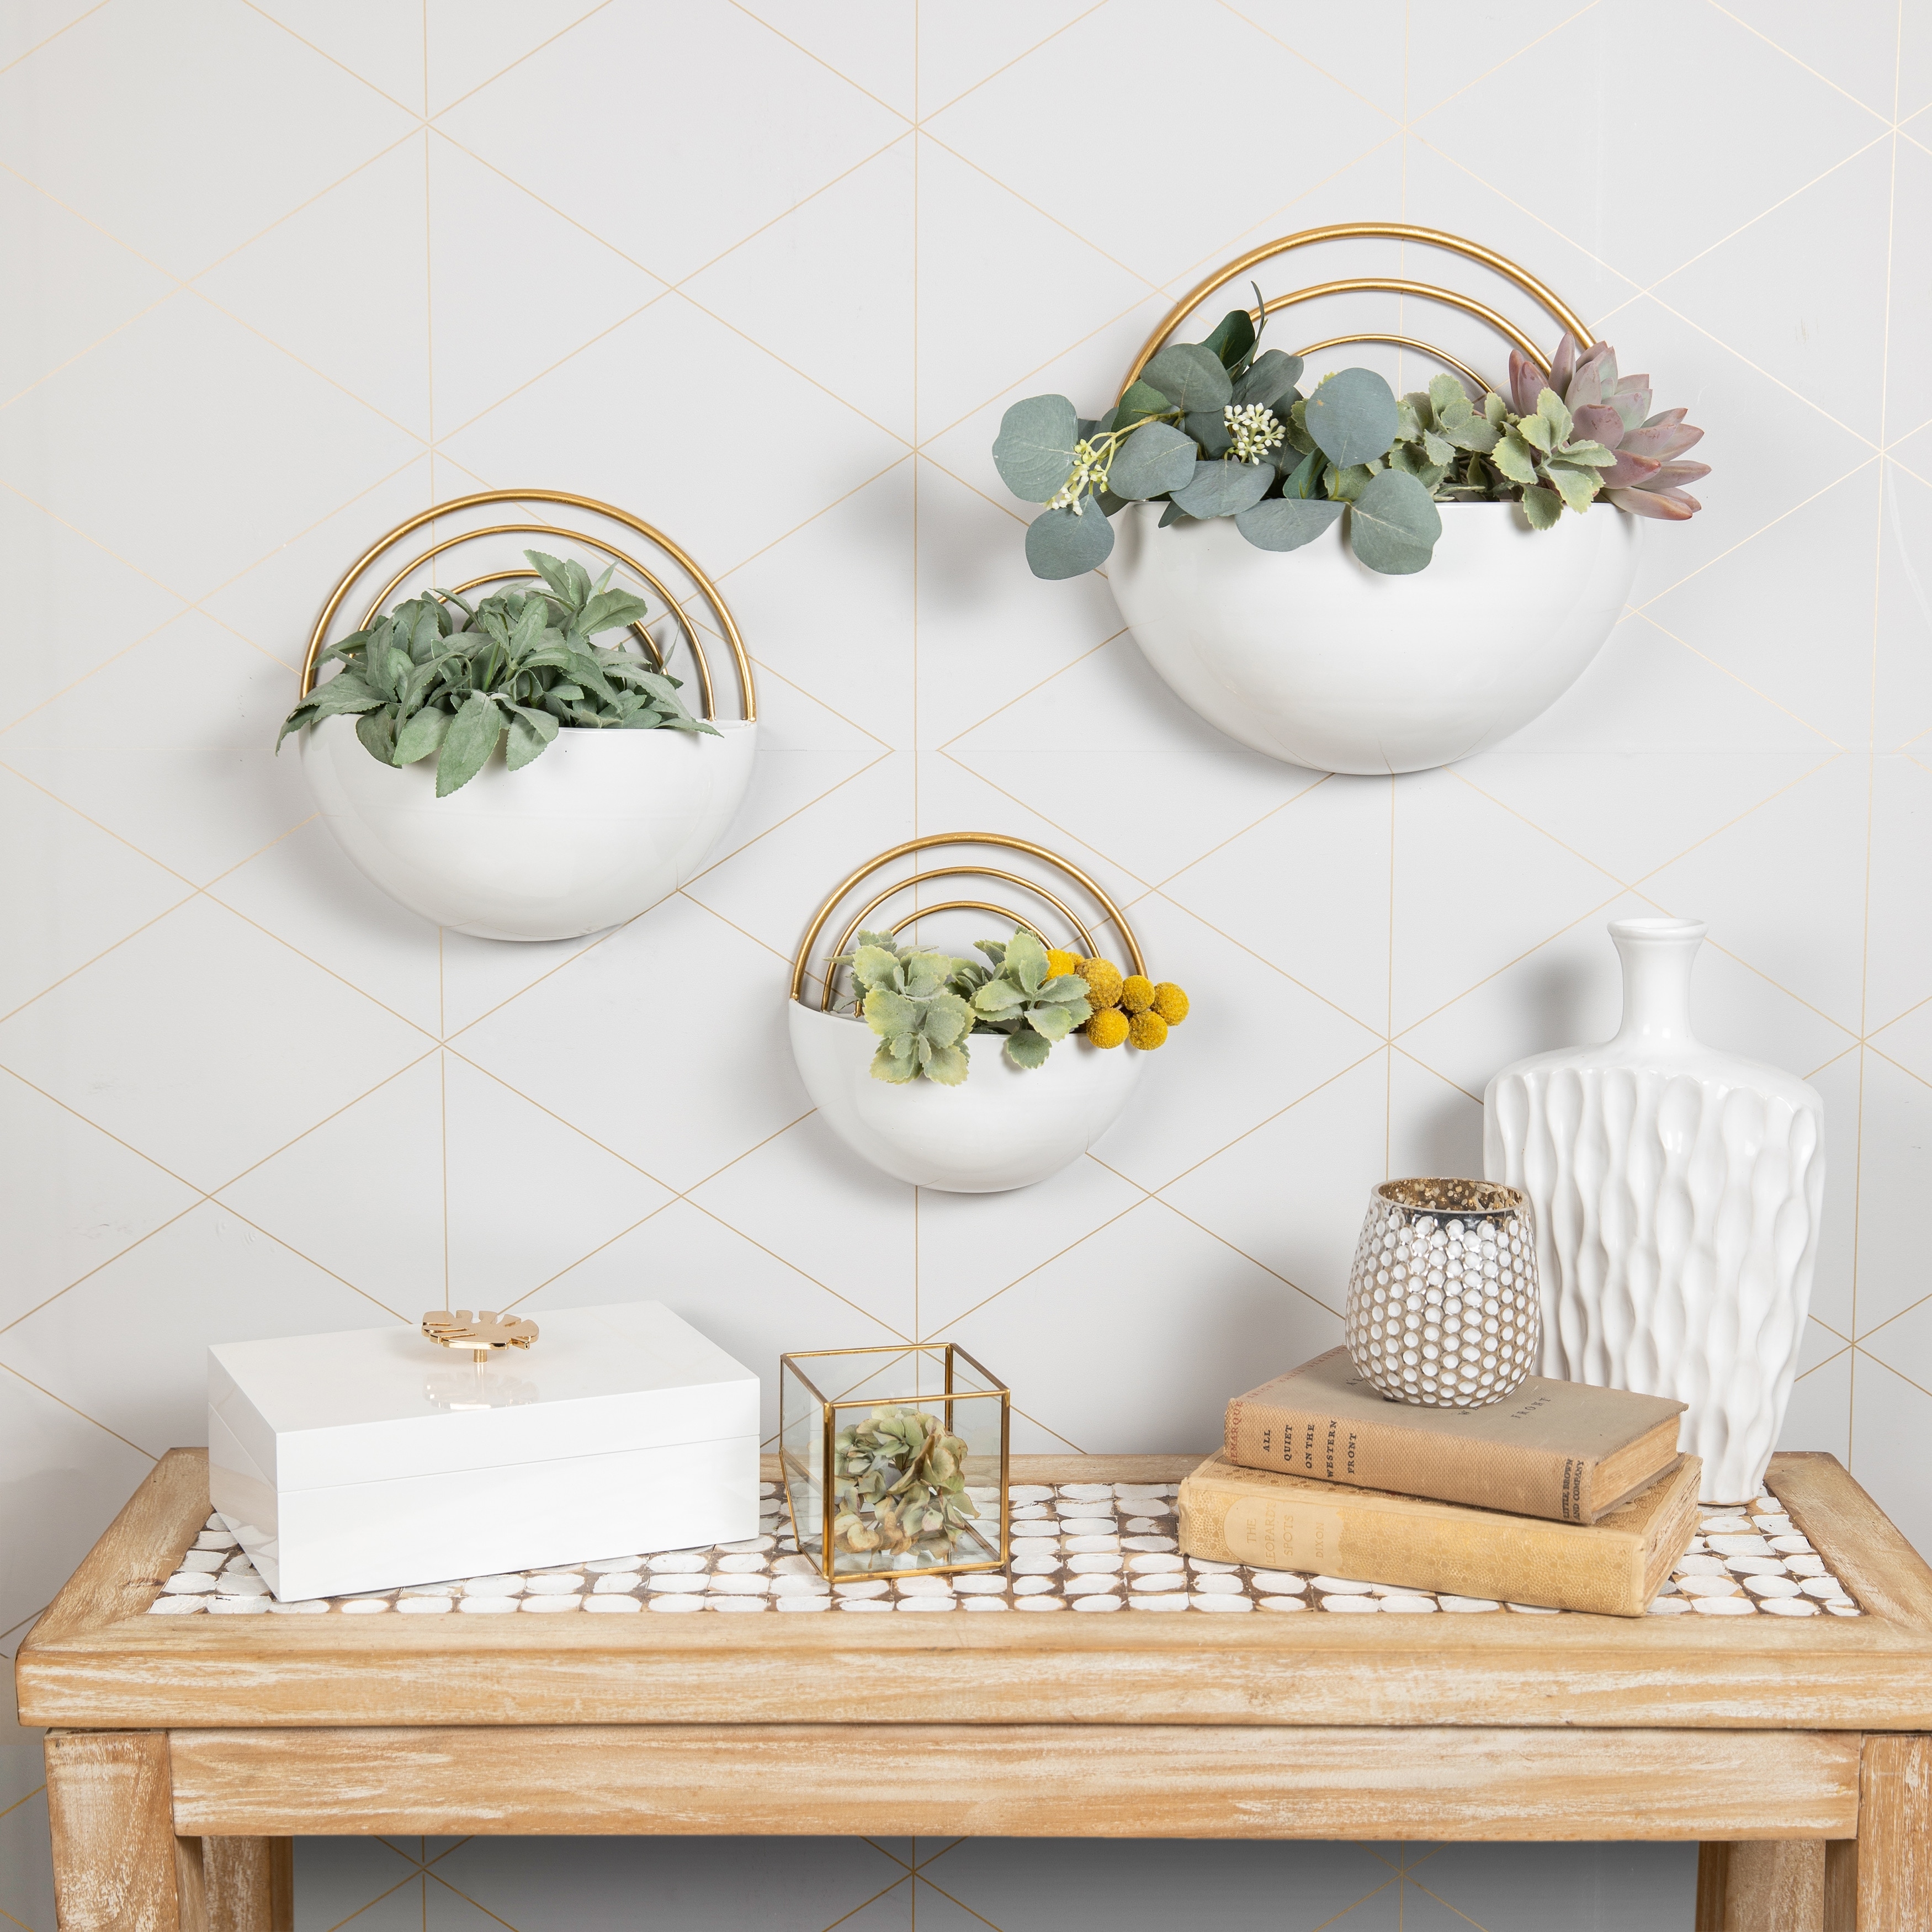 https://ak1.ostkcdn.com/images/products/is/images/direct/f3a2fbf51bb074fc1f15183e34cae77b3de930cb/Crescent-3-Piece-Metal-Wall-Planter-Set---White-with-Gold-Detail.jpg